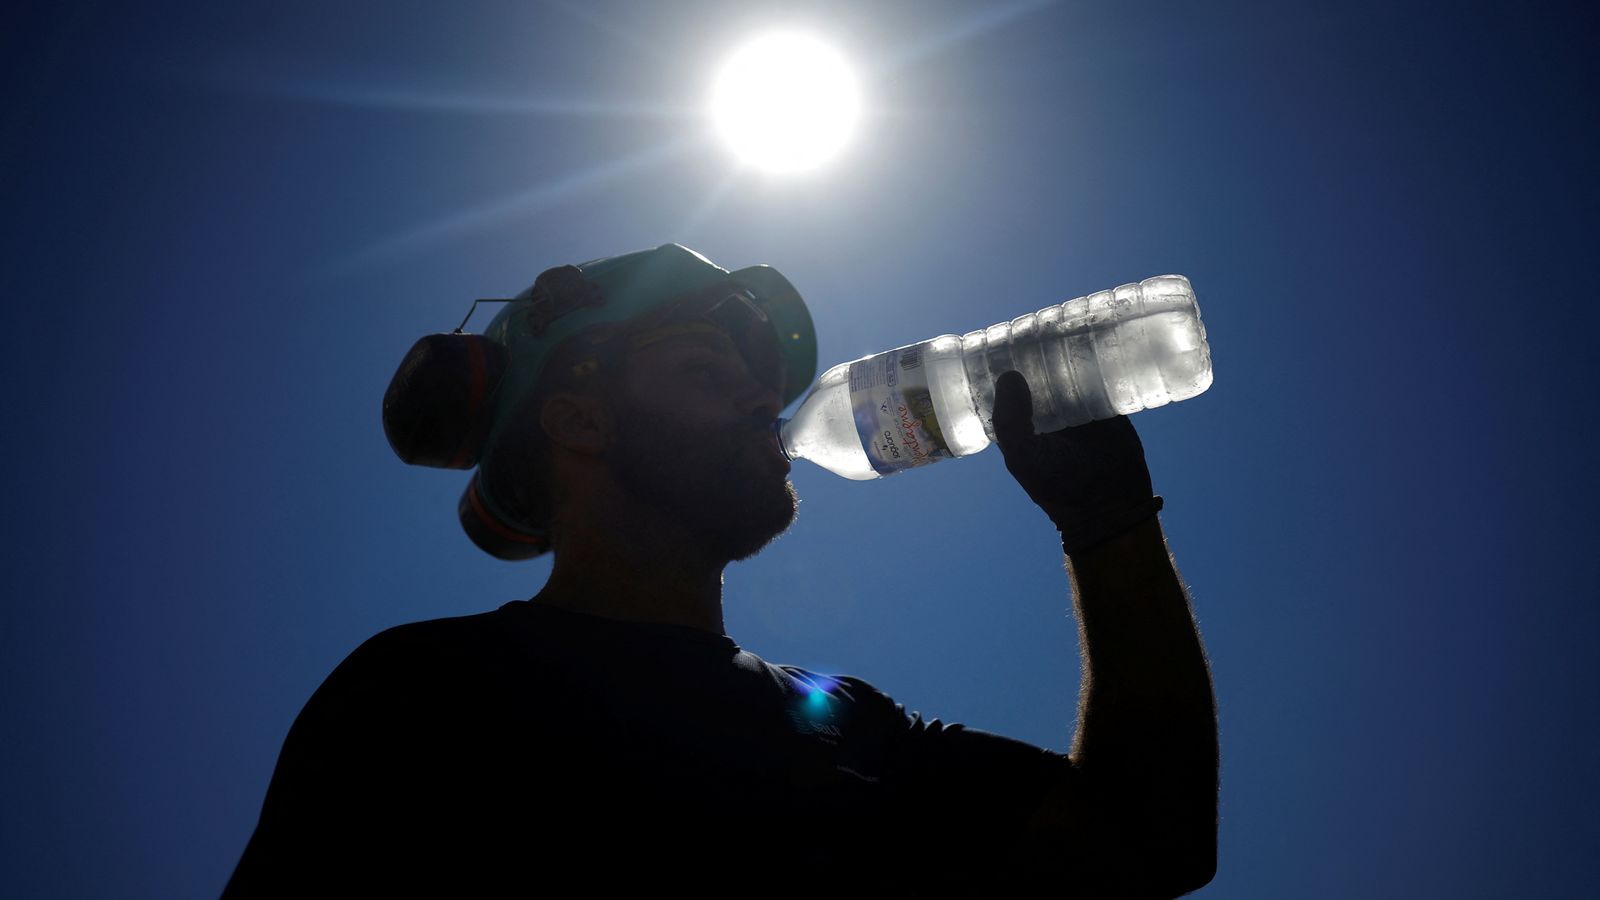 heat-exhaustion-and-heatstroke-what-are-the-signs-and-symptoms-and-what-s-difference